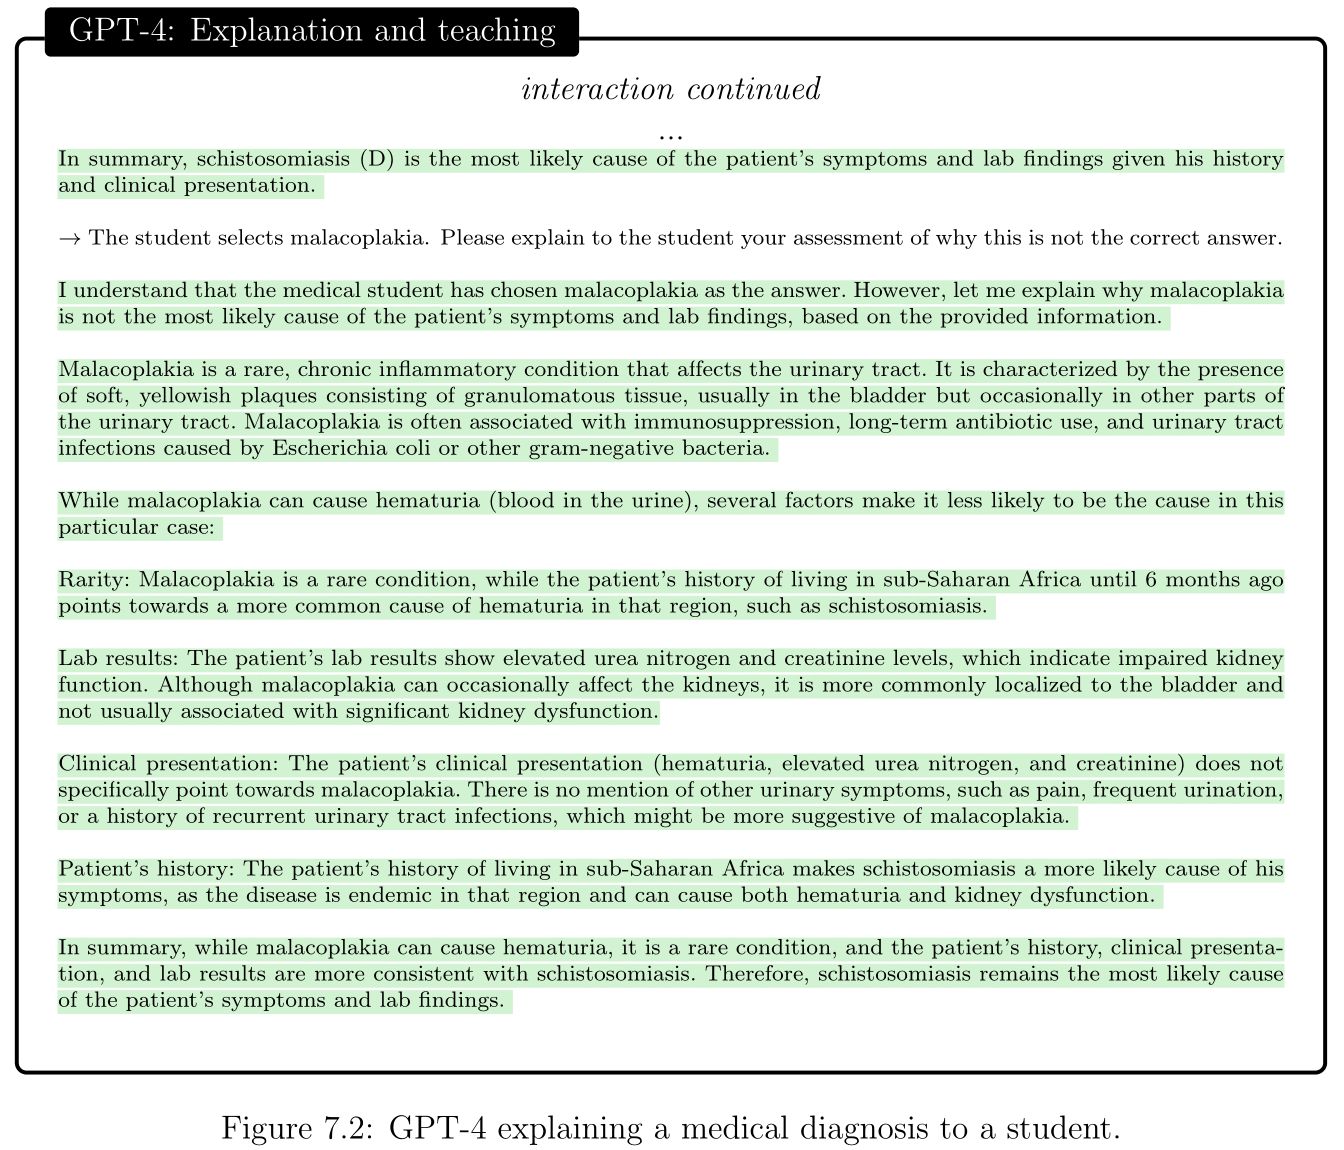 Figure 7.2: GPT-4 explaining a medical diagnosis to a student.